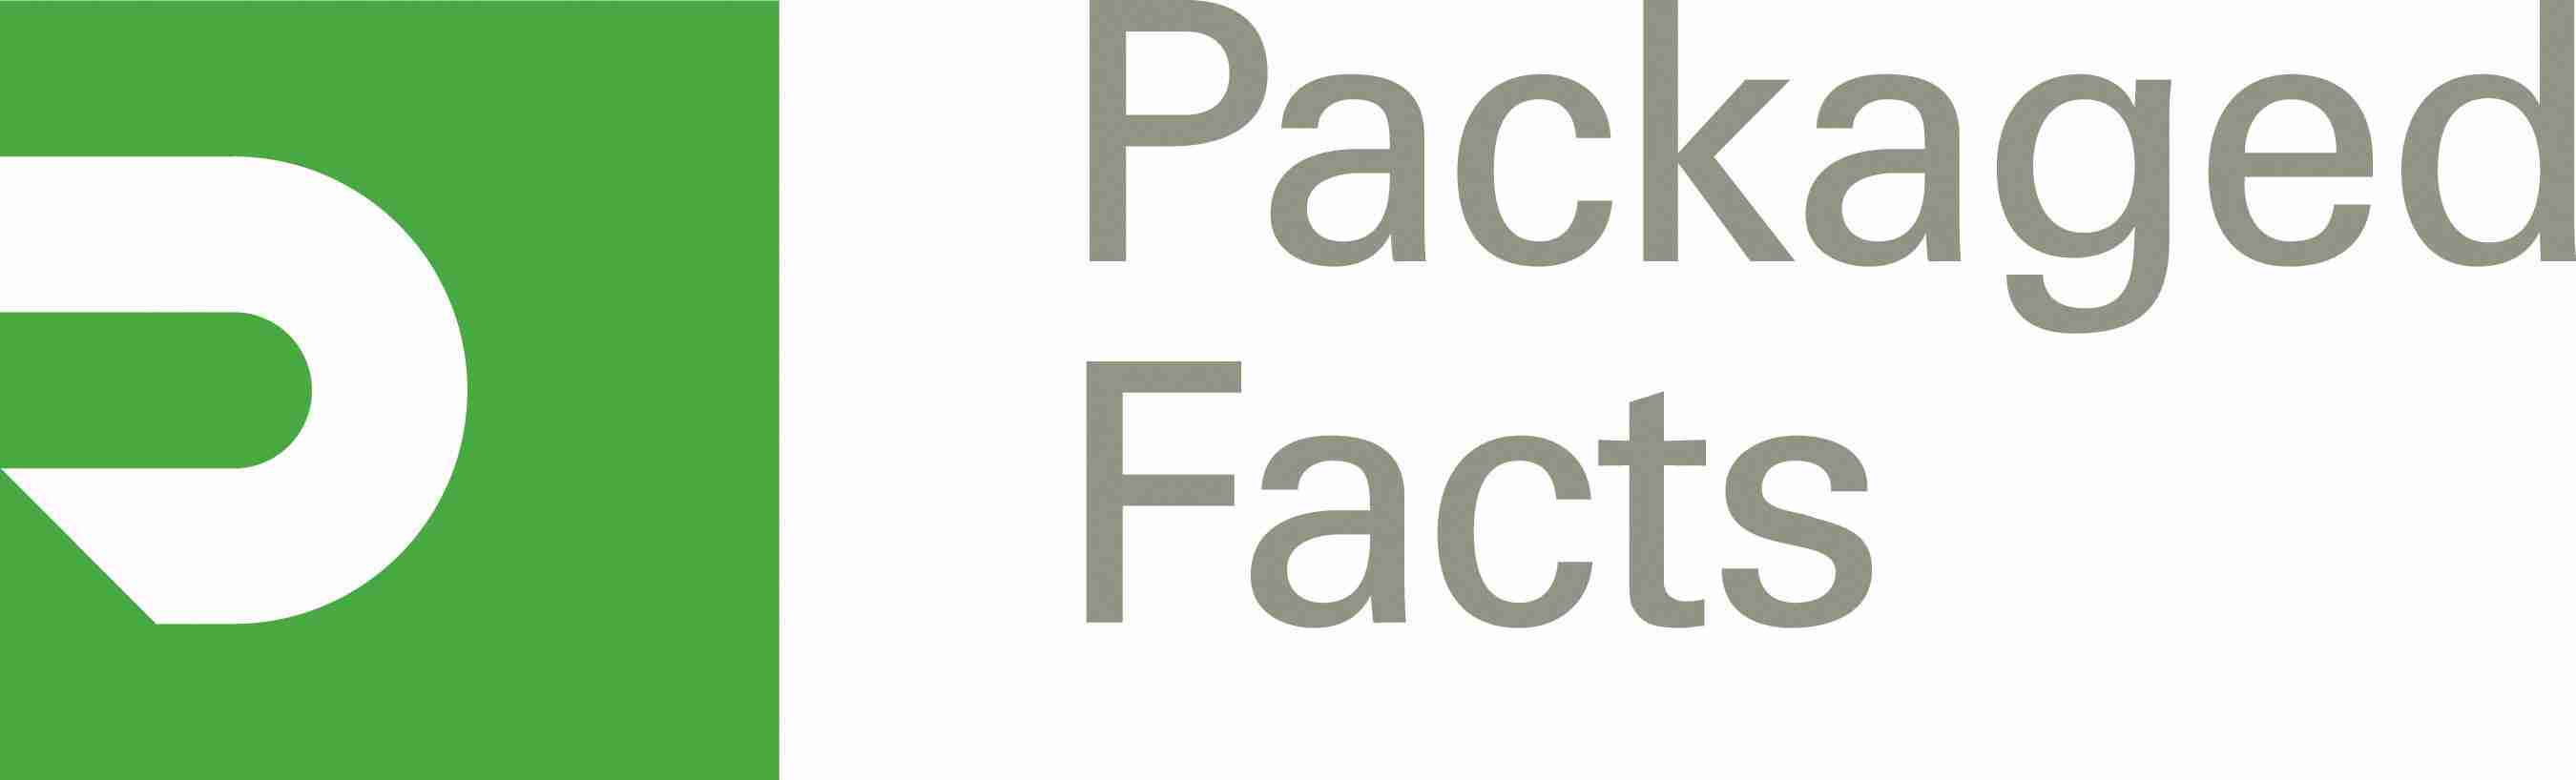 Packaged Facts Logo. (PRNewsFoto/Packaged Facts)